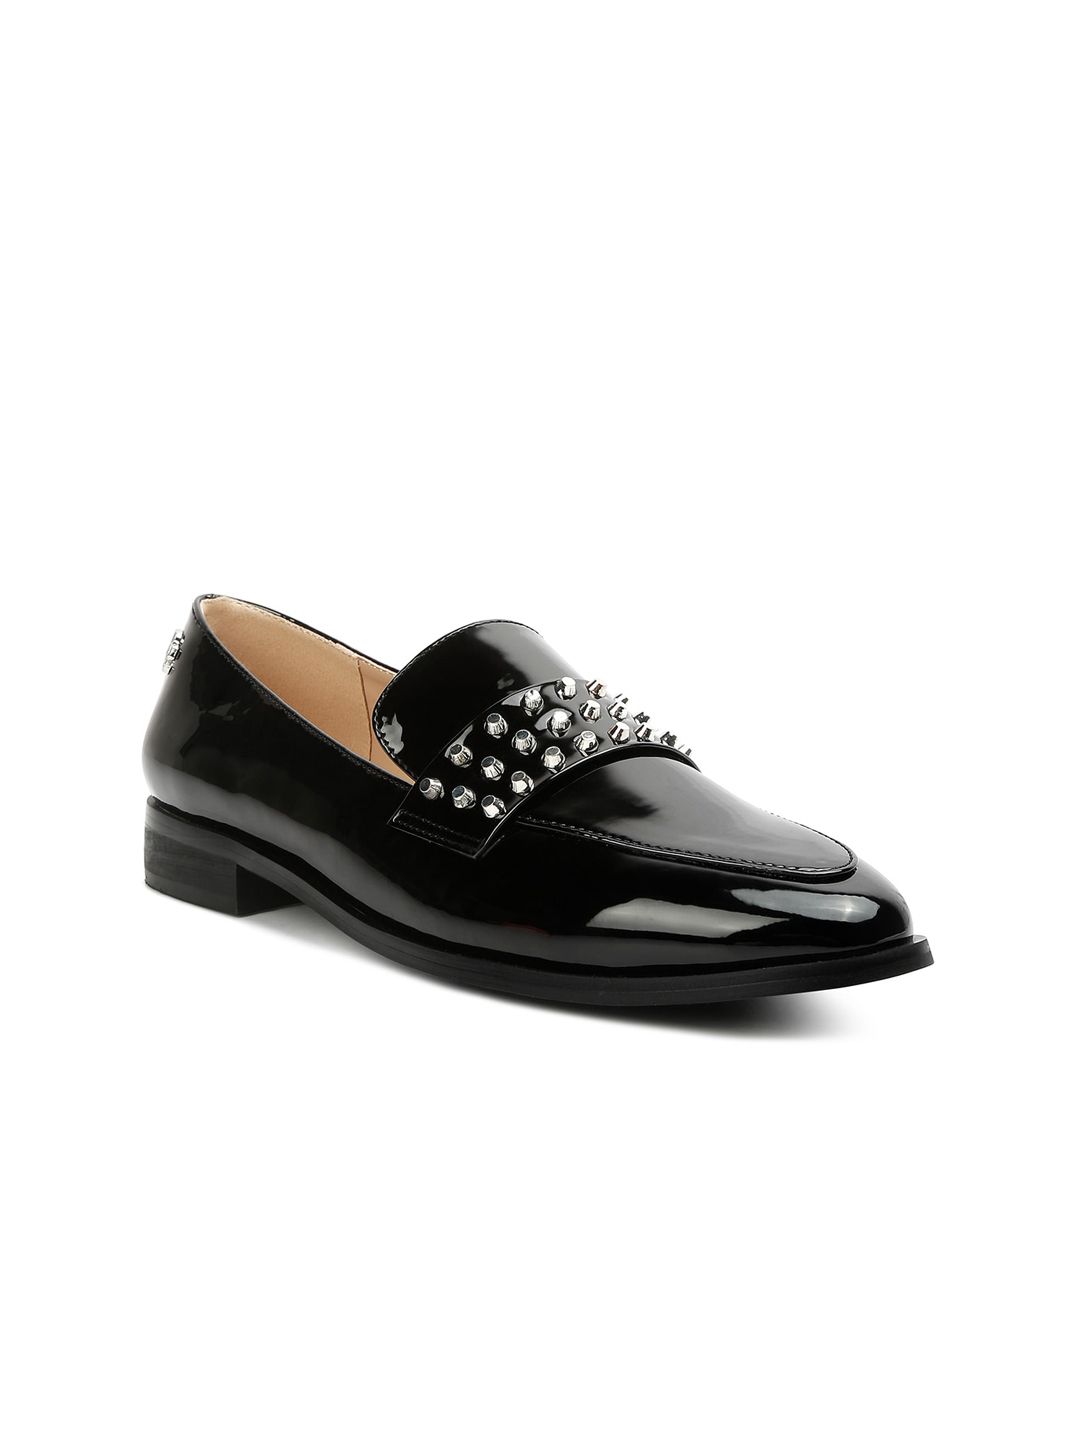 RAG & CO Women Stud Detail Patent Loafers Price in India